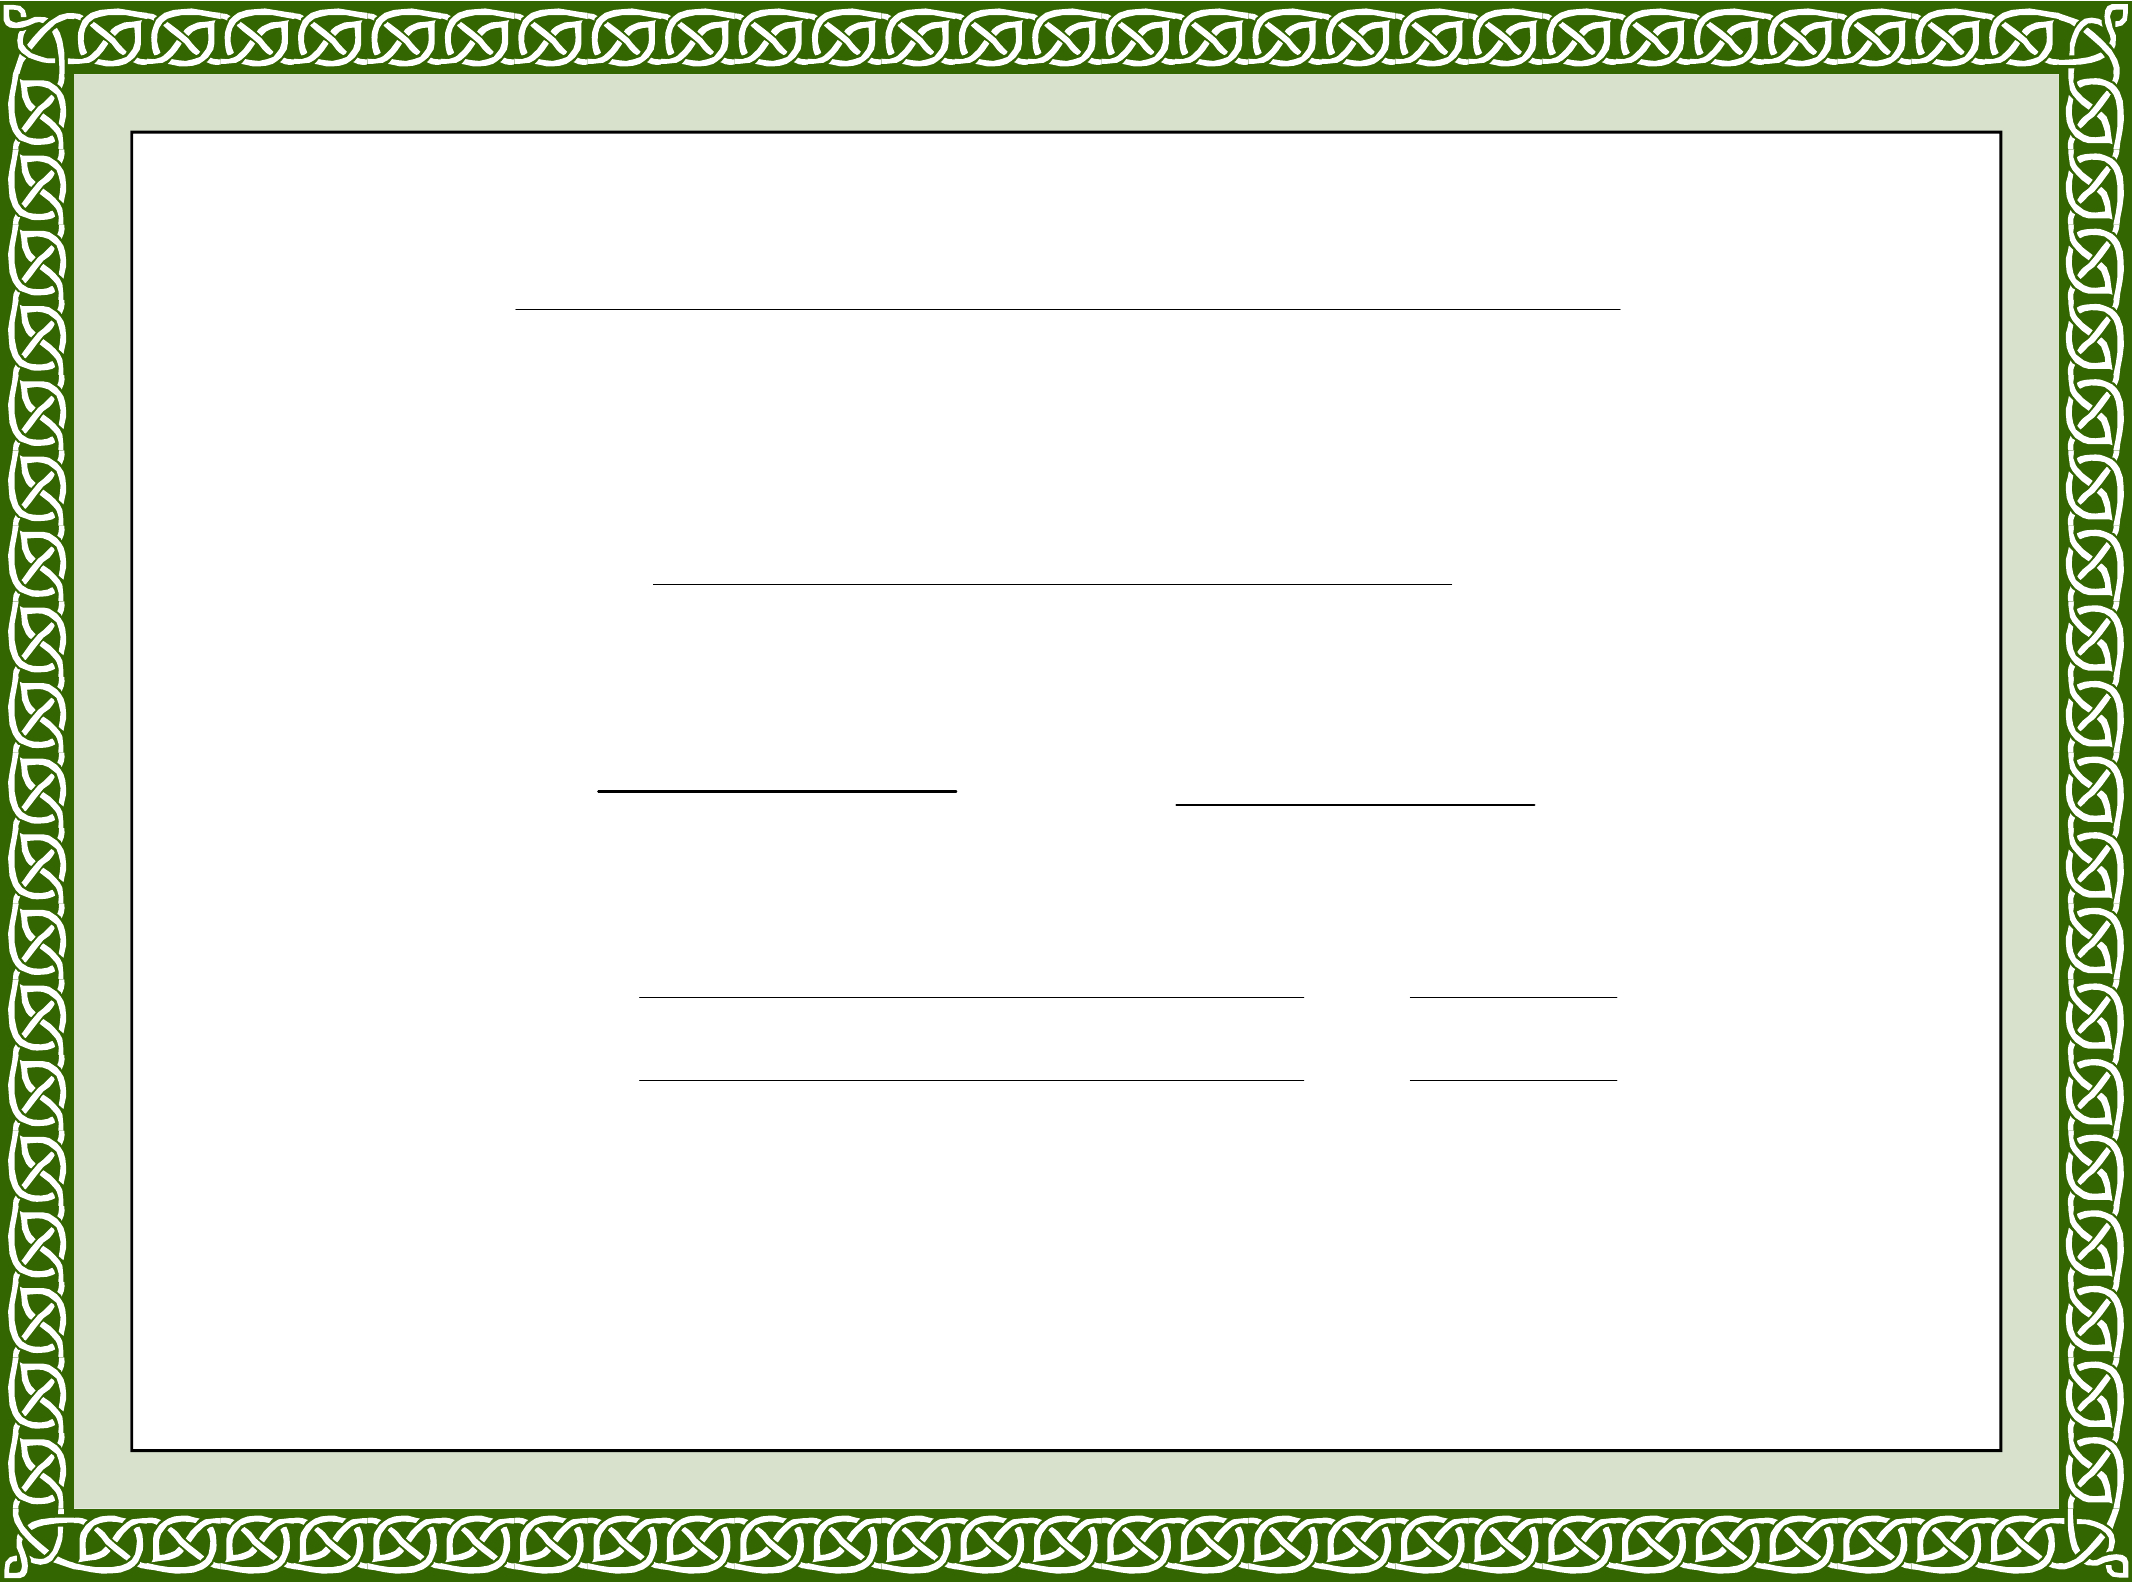 Sample Training Completion Certificate Template Free Download Throughout Blank Certificate Templates Free Download